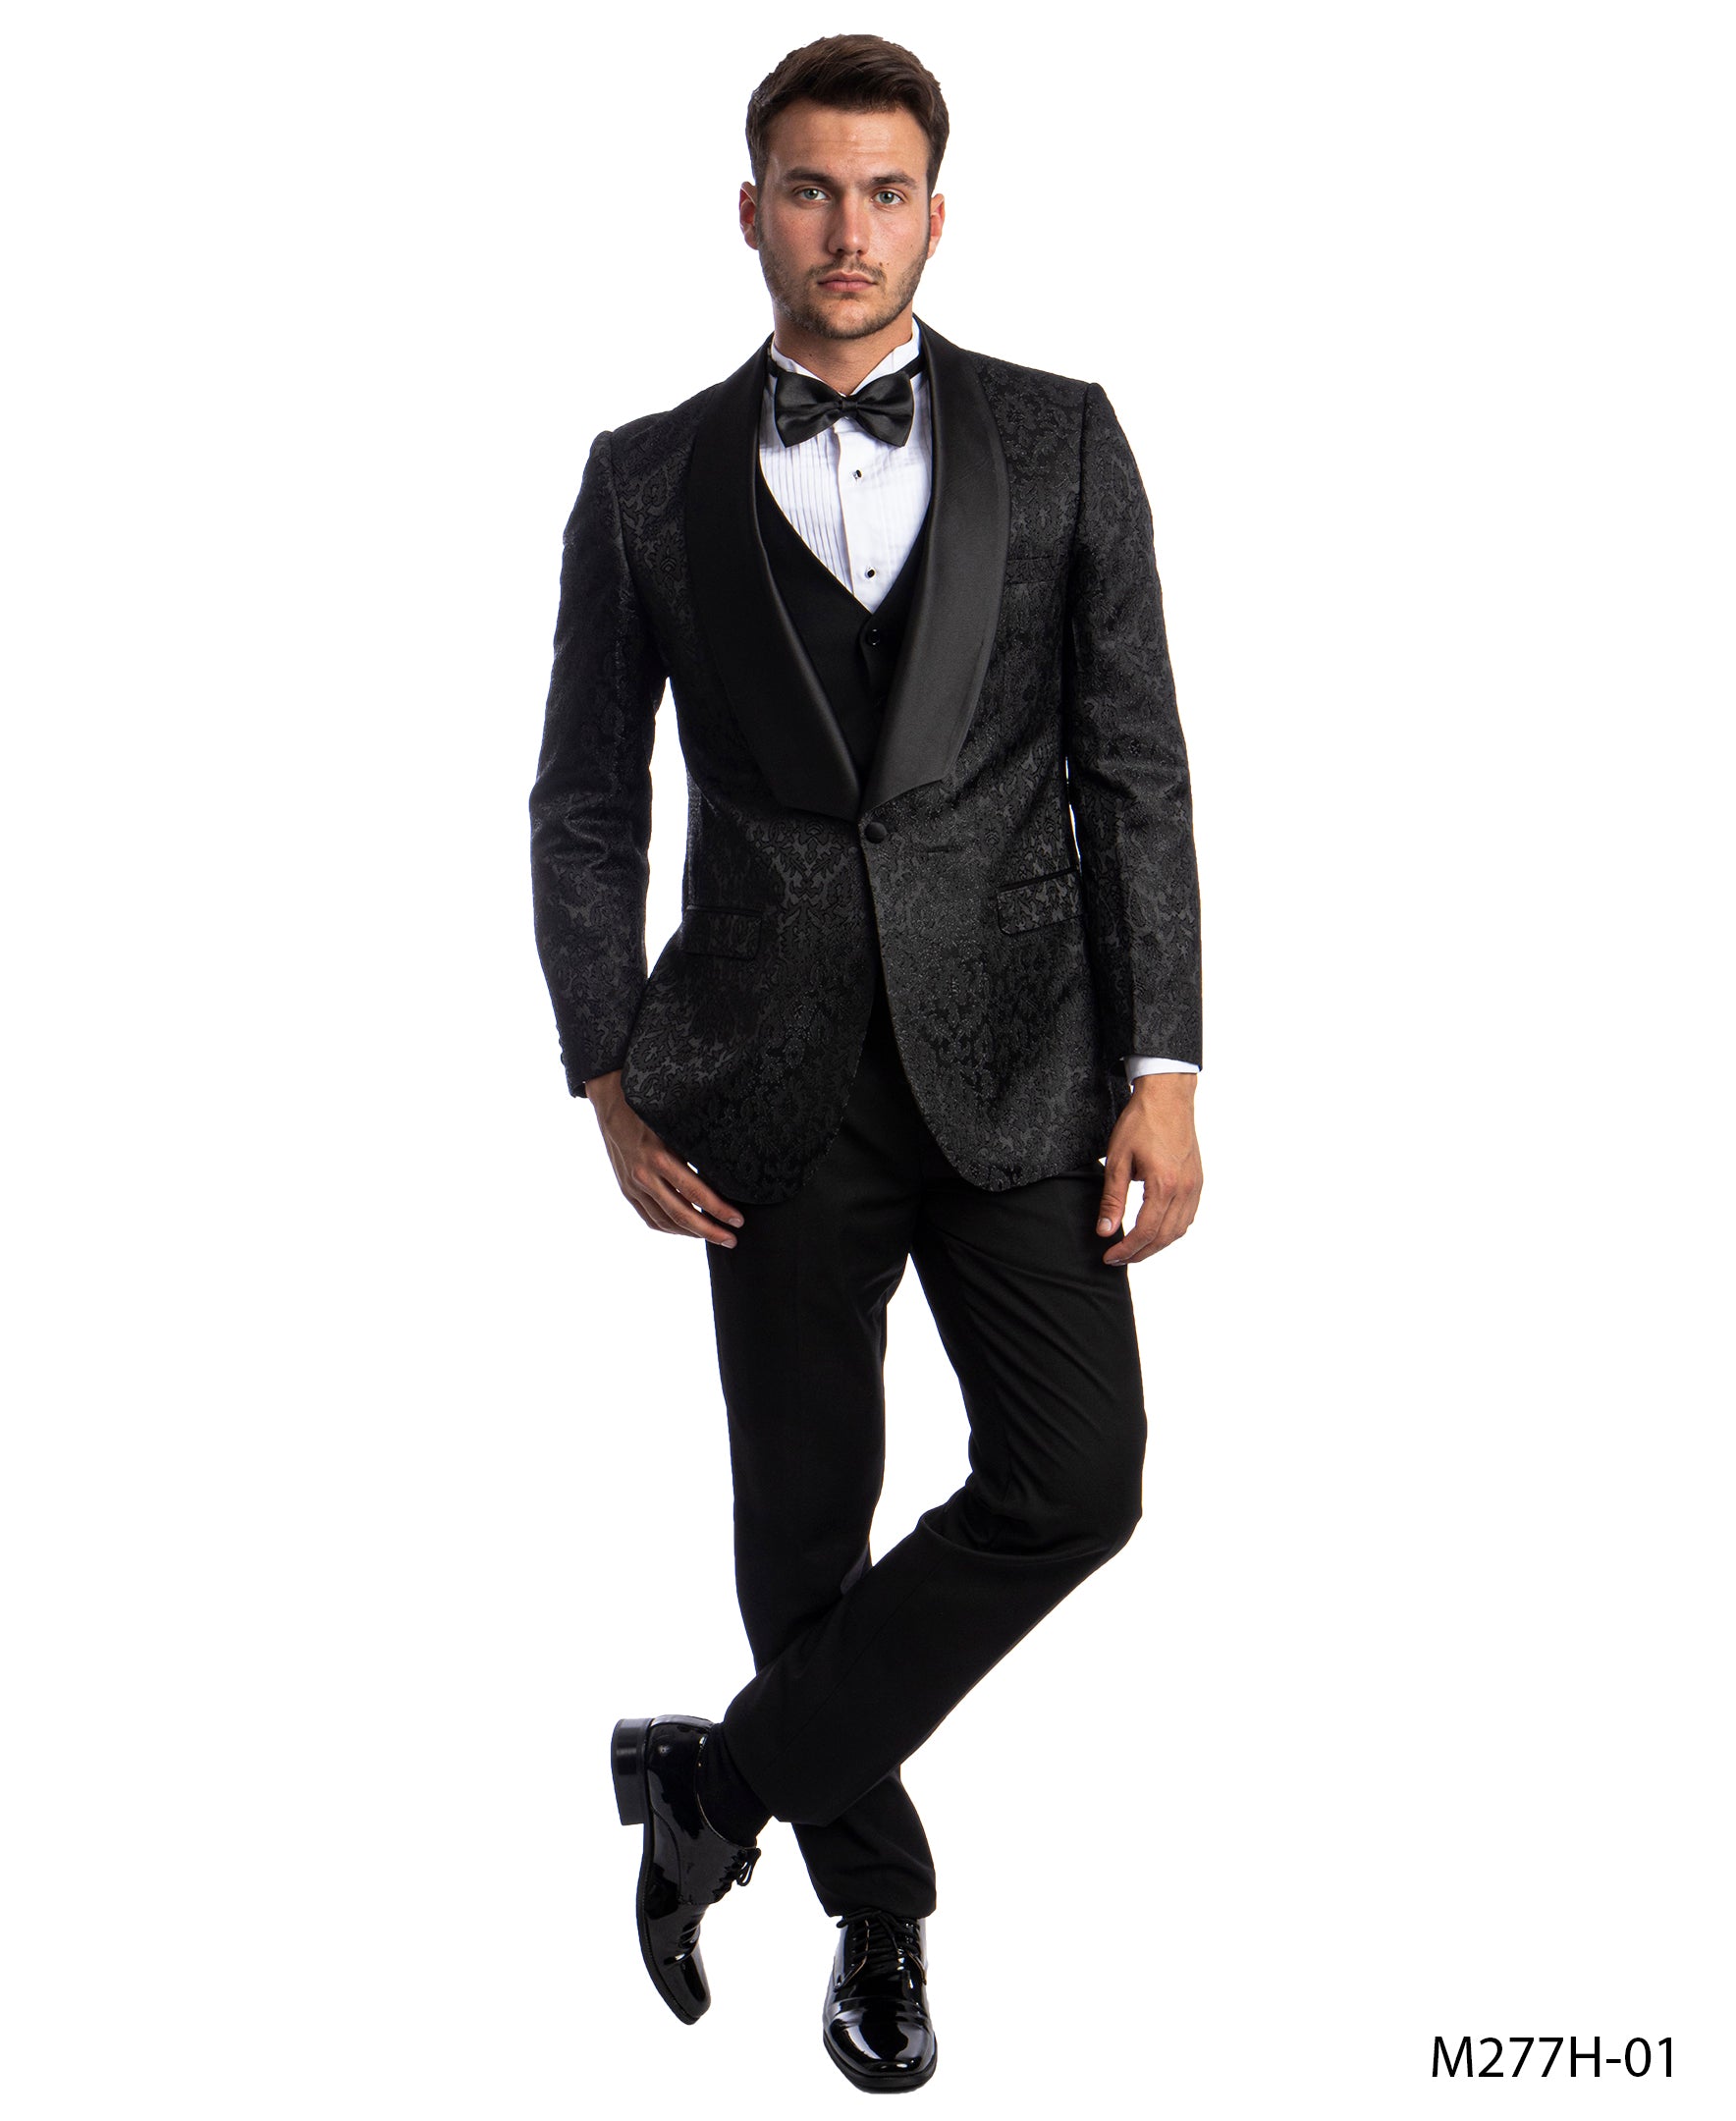 Black  Suit For Men Formal Suits For All Ocassions